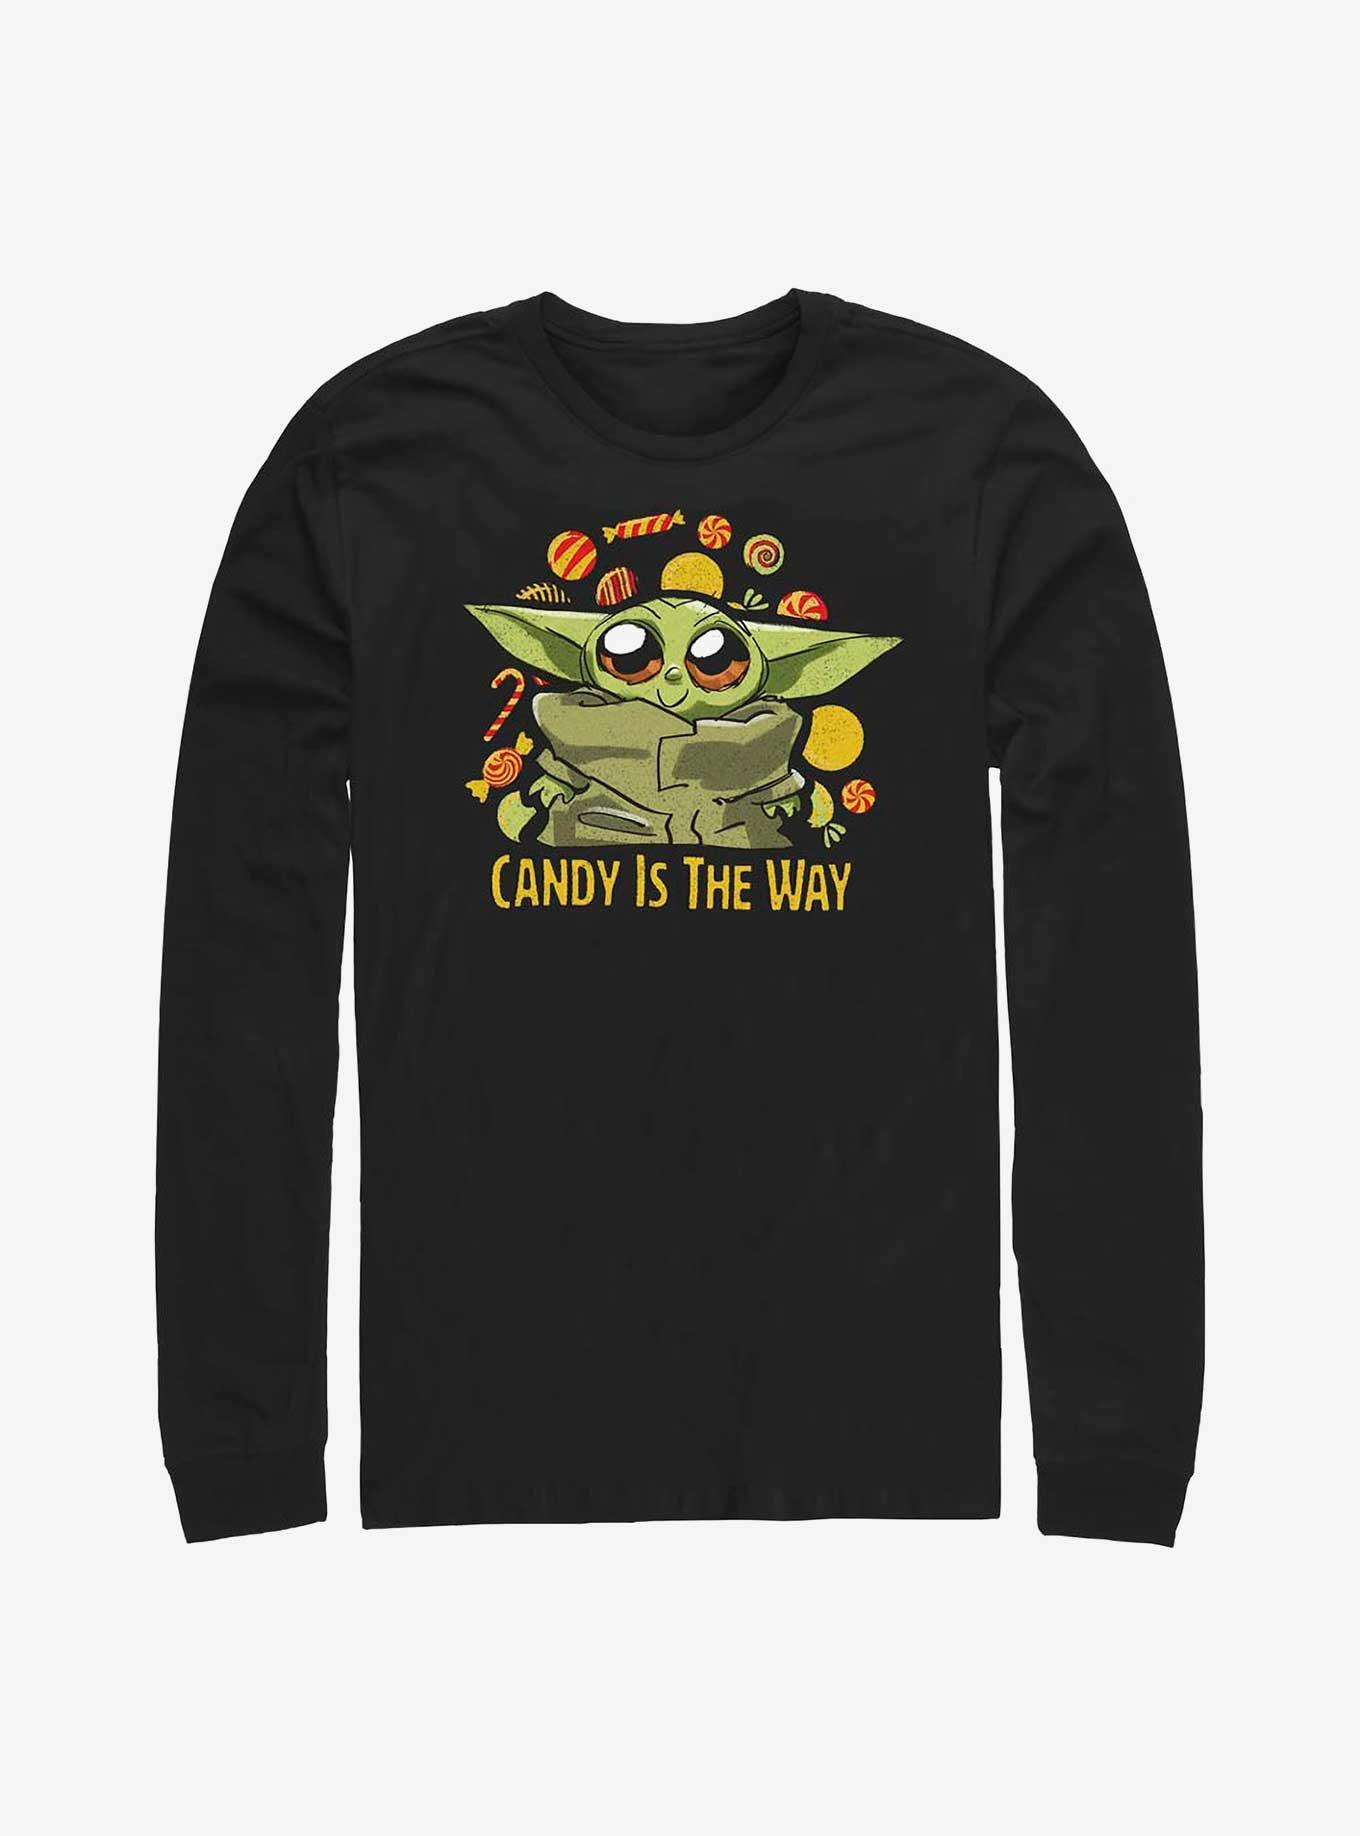 Star Wars The Mandalorian The Child Candy Is The Way Long-Sleeve T-Shirt, BLACK, hi-res